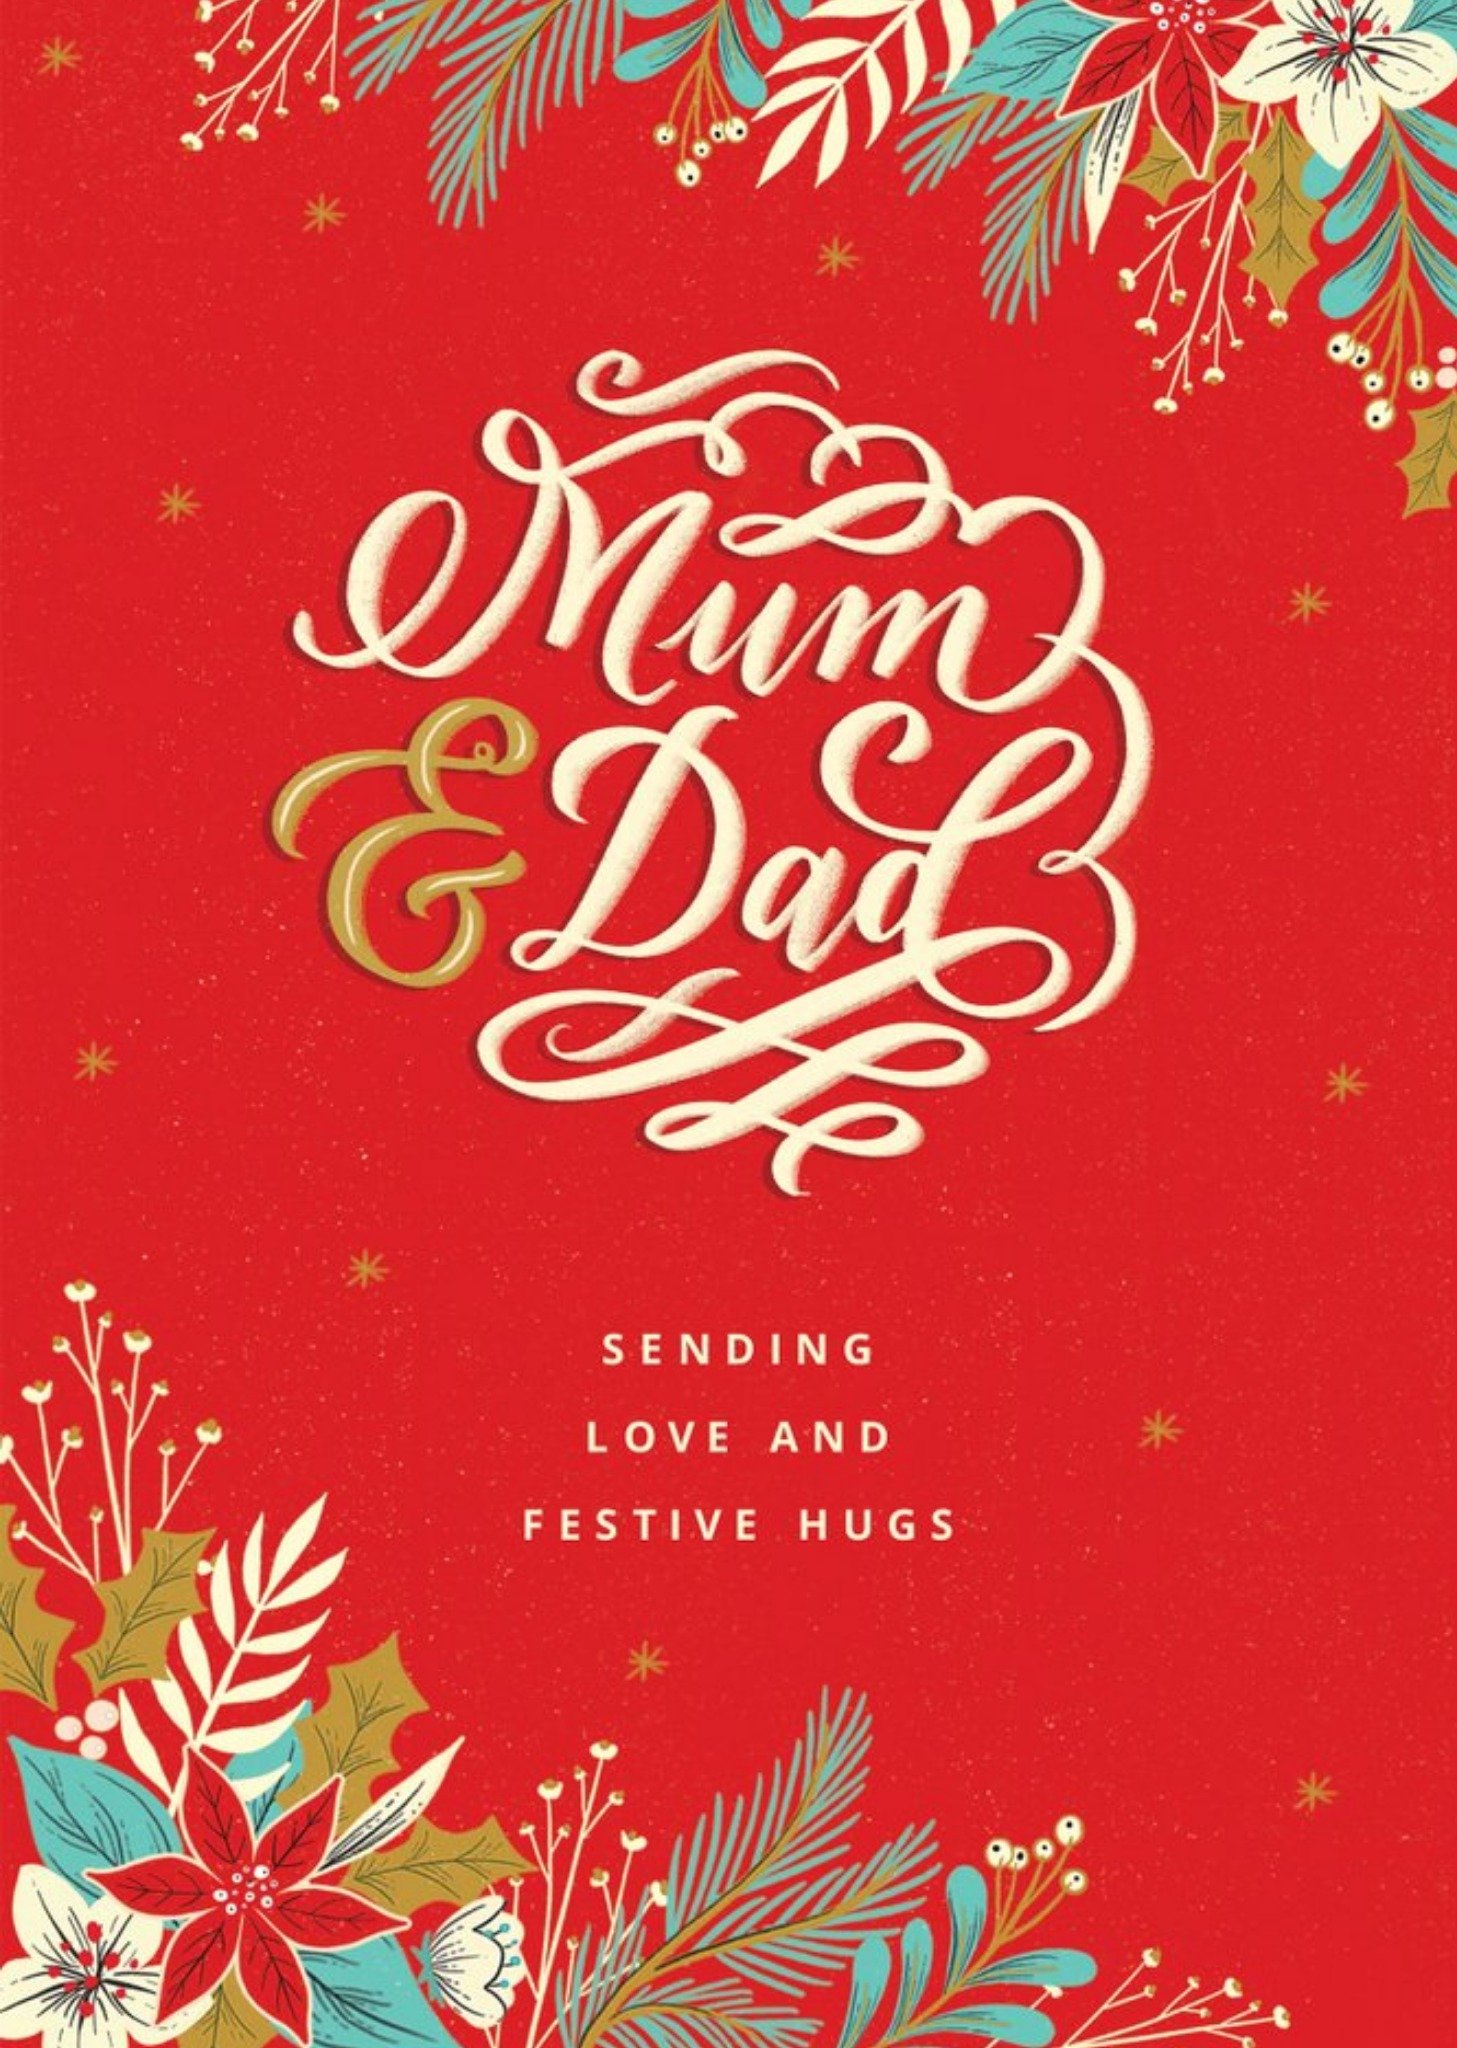 Moonpig Floral Mum And Dad Sending You Love And Festive Hugs Christmas Card Ecard